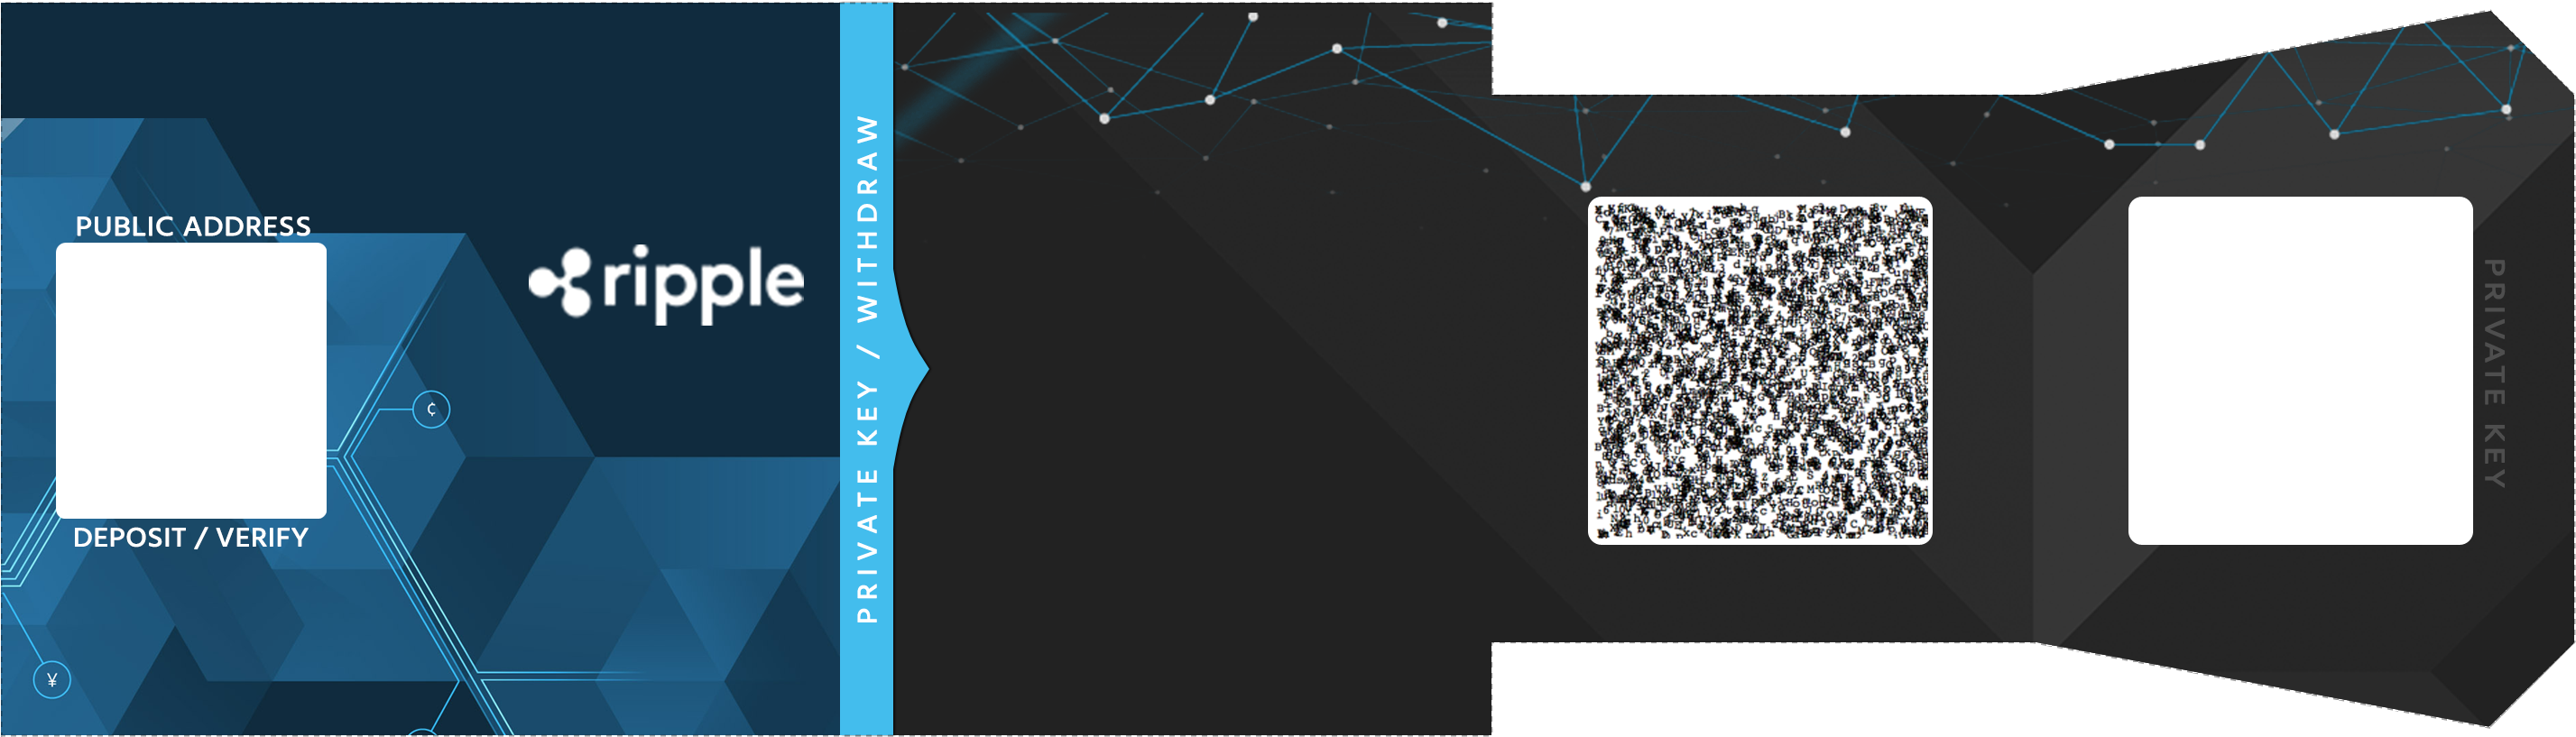 Ripple Cryptocurrency Wallet Design PNG